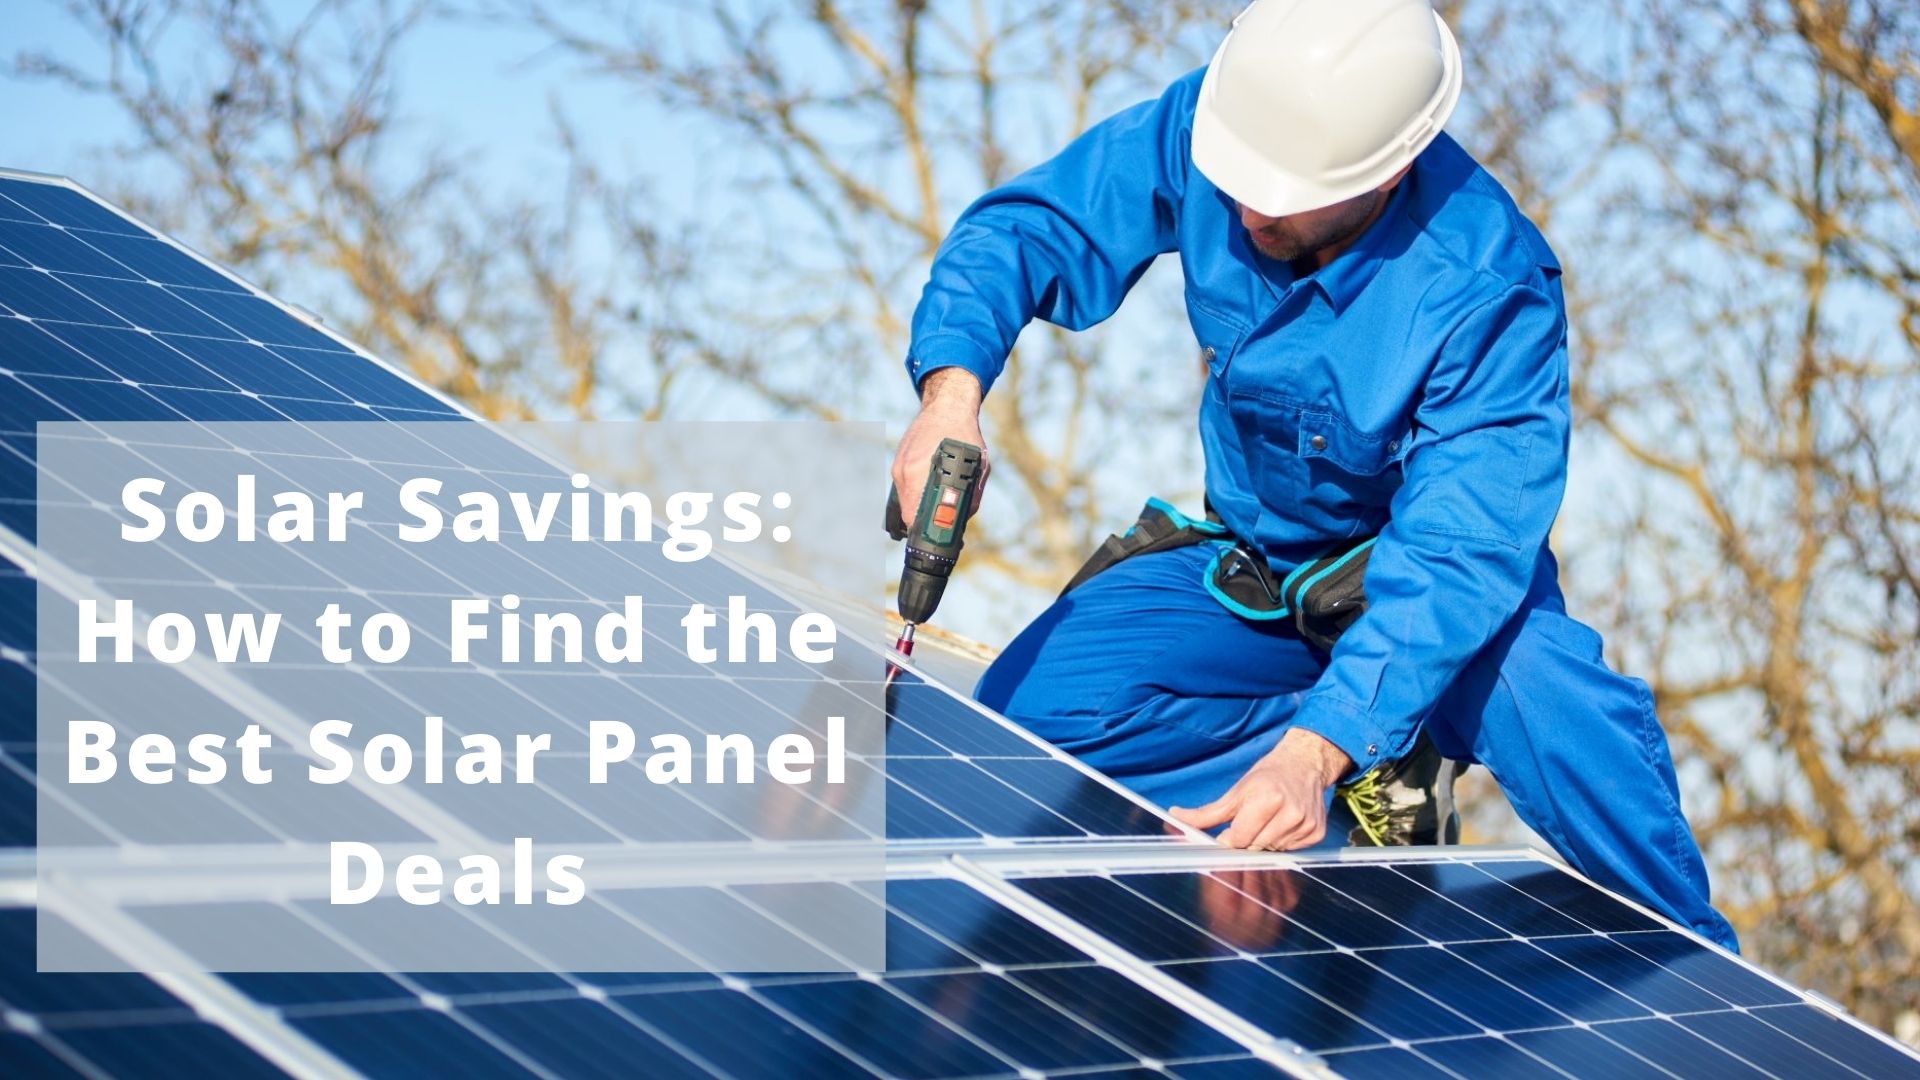 Solar Savings: How to Find the Best Solar Panel Deals